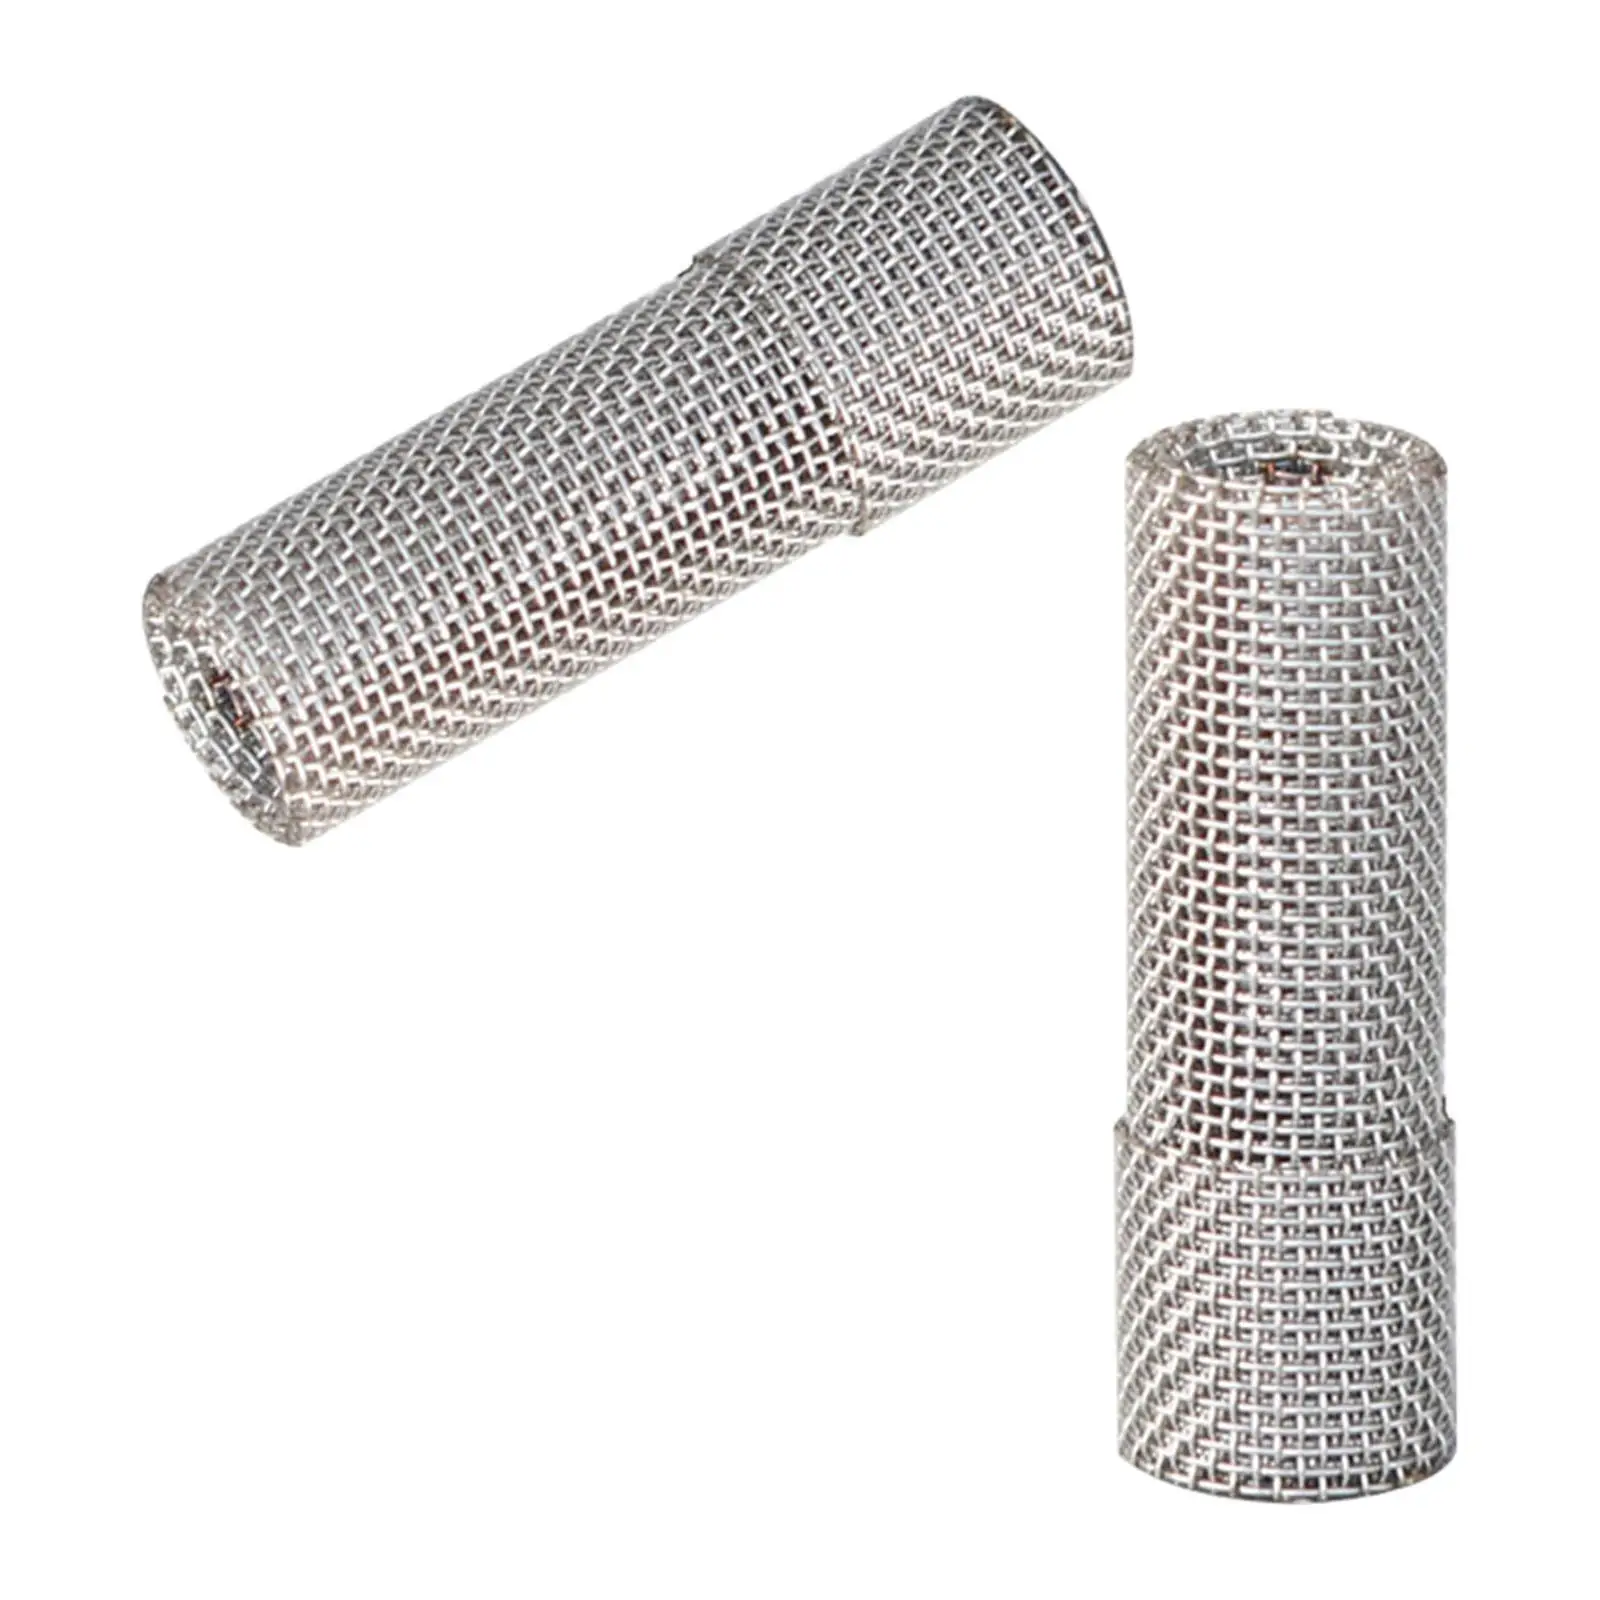 2Pieces Water Heating Fuel Filter Mesh Premium High Performance Replaces Durable Spare Parts Stainless Steel Whw-E-D5-Lw